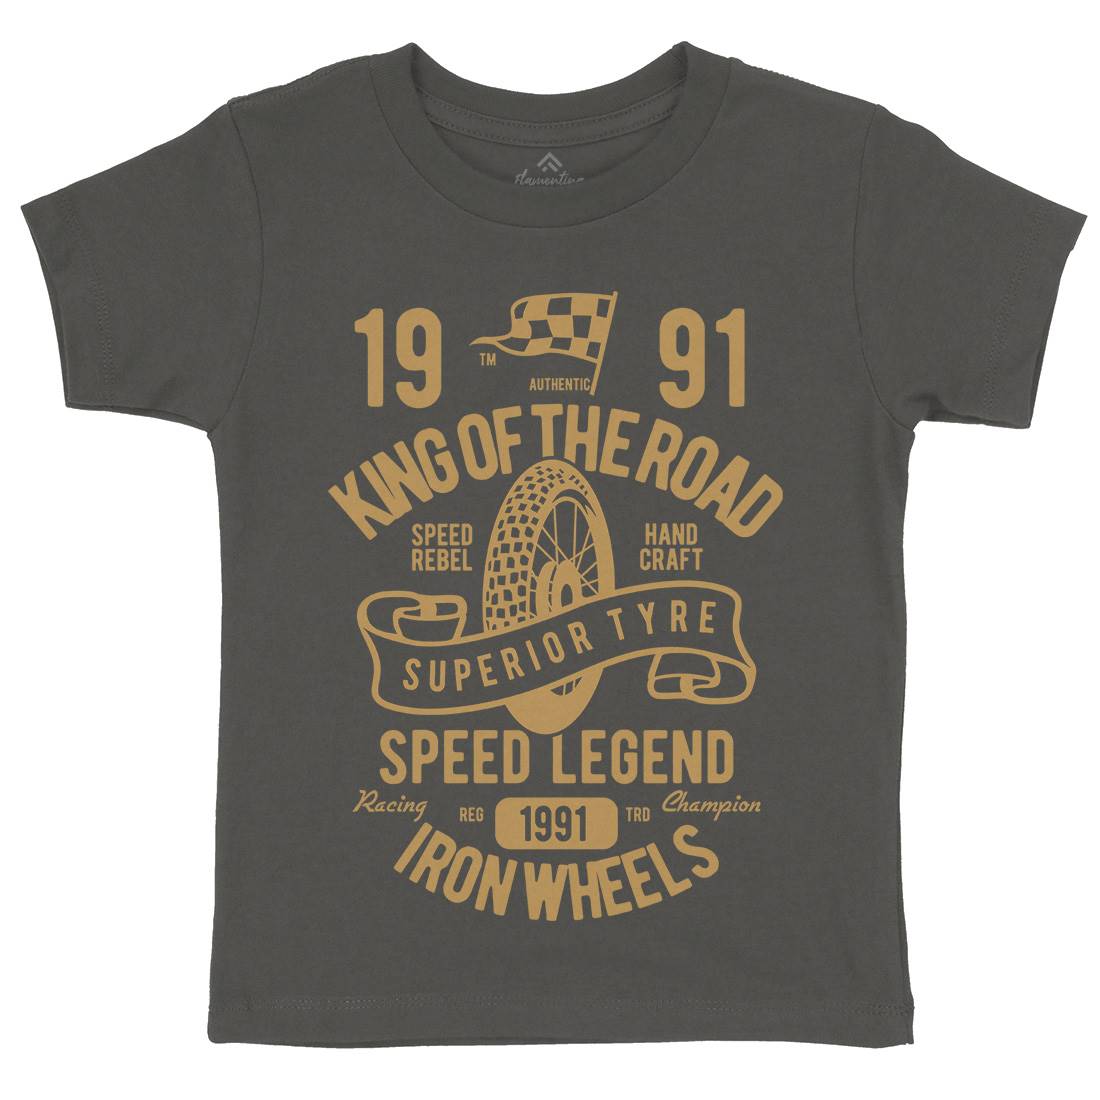 Superior Tyre King Of The Road Kids Crew Neck T-Shirt Motorcycles B458